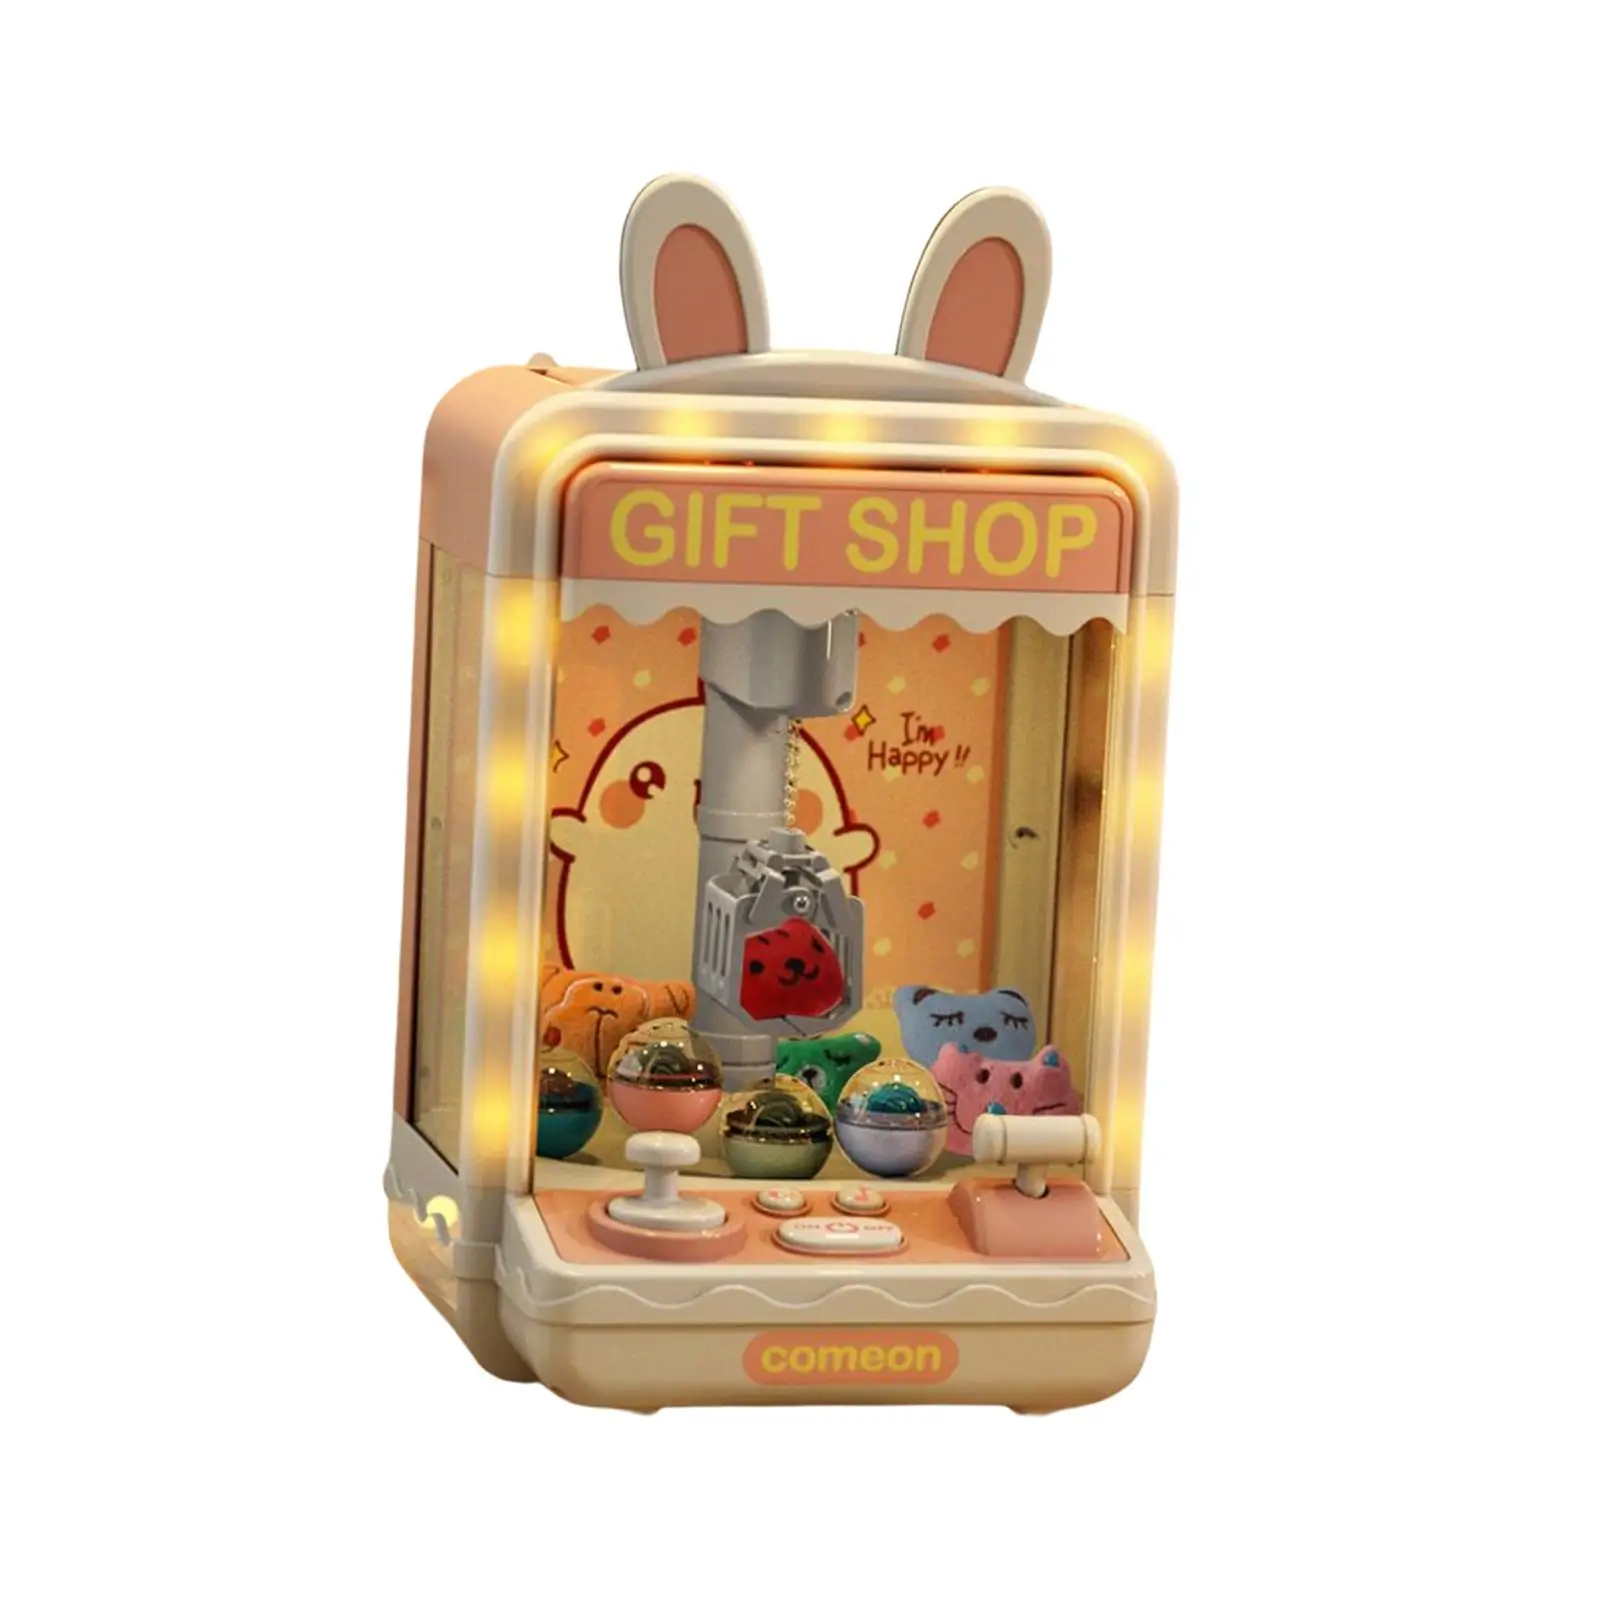 Claw Machine Novelty Sturdy Game Prizes Toy Electronic Small Toy Game for Living Room Party Adults Boys Girls Children